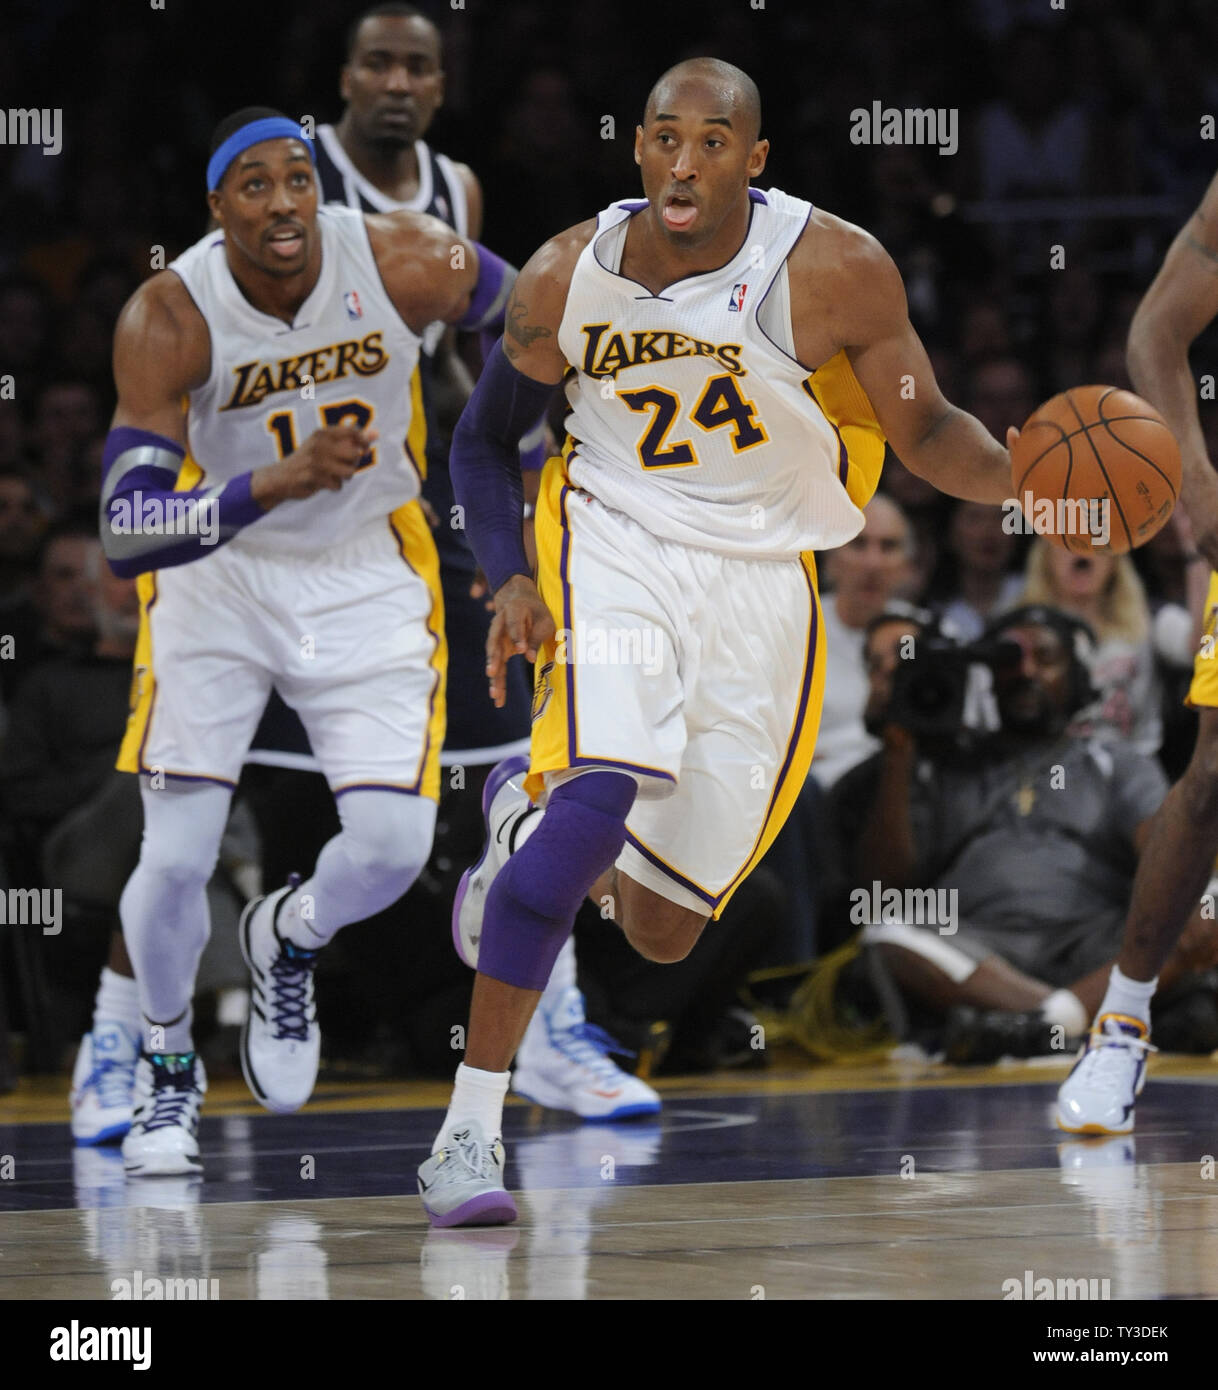 Los Angeles Lakers shooting guard Kobe Bryant (24) brings the ball up court against the Oklahoma City Thunder in the first half at Staples Center in Los Angeles on January 27, 2013. UPI/Lori Shepler Stock Photo